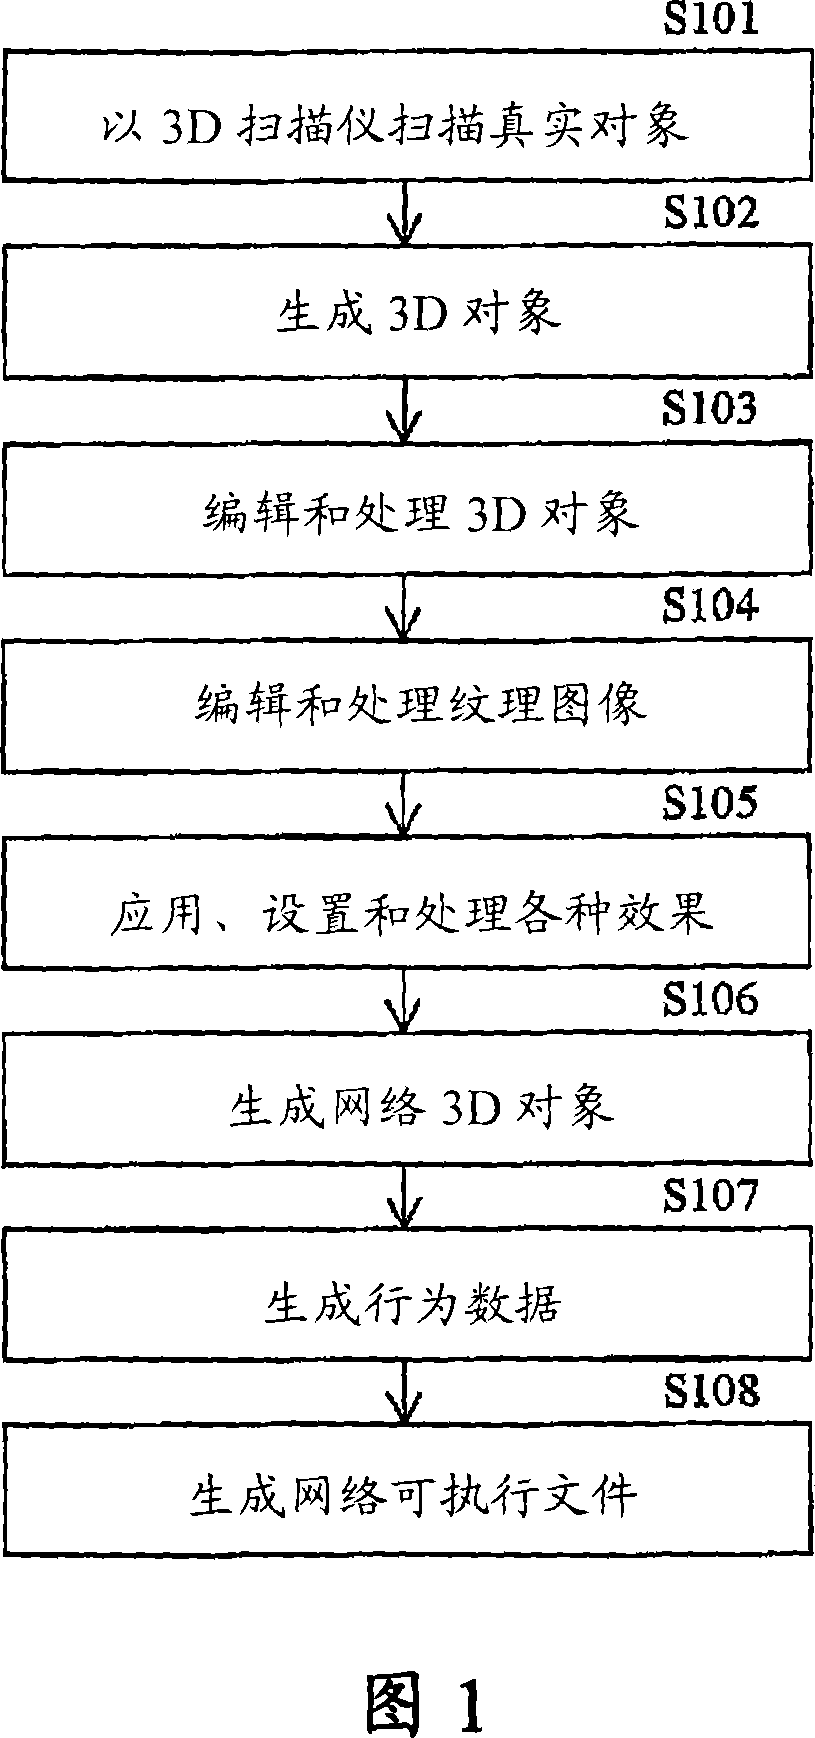 3D image forming and displaying system